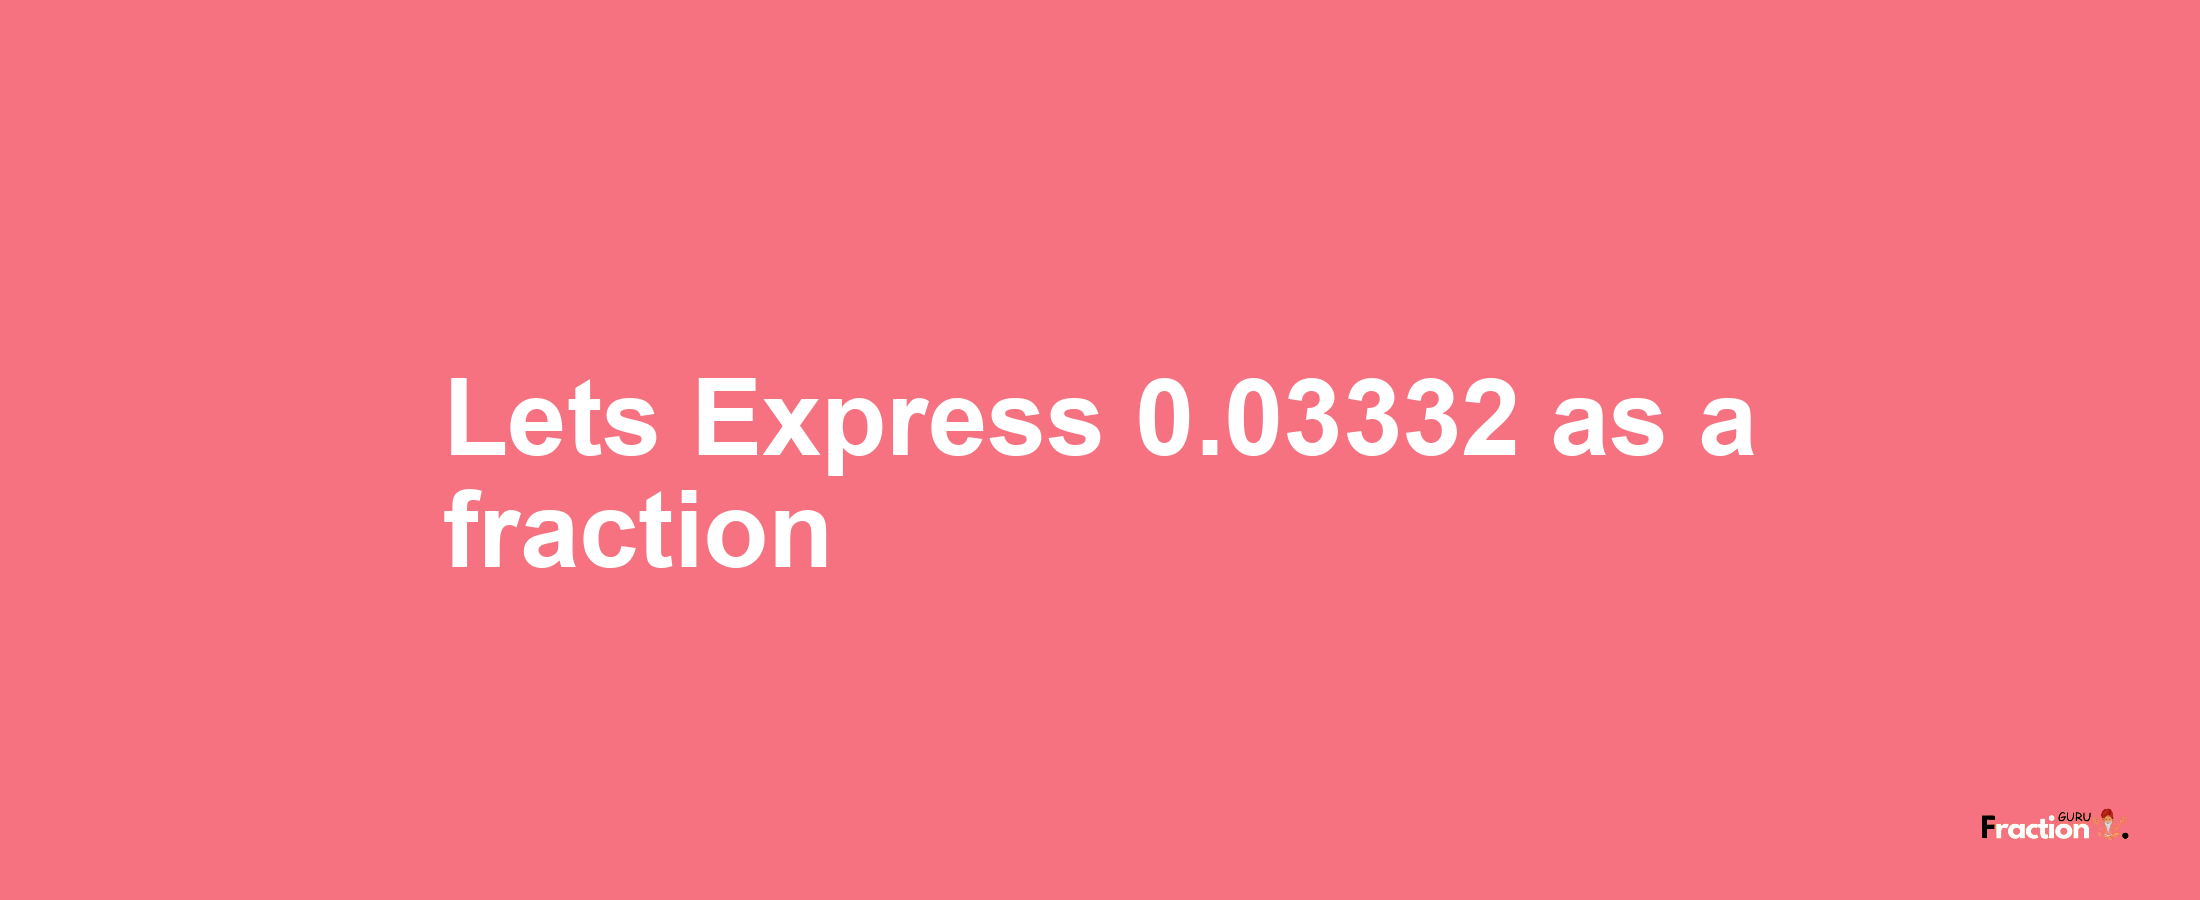 Lets Express 0.03332 as afraction